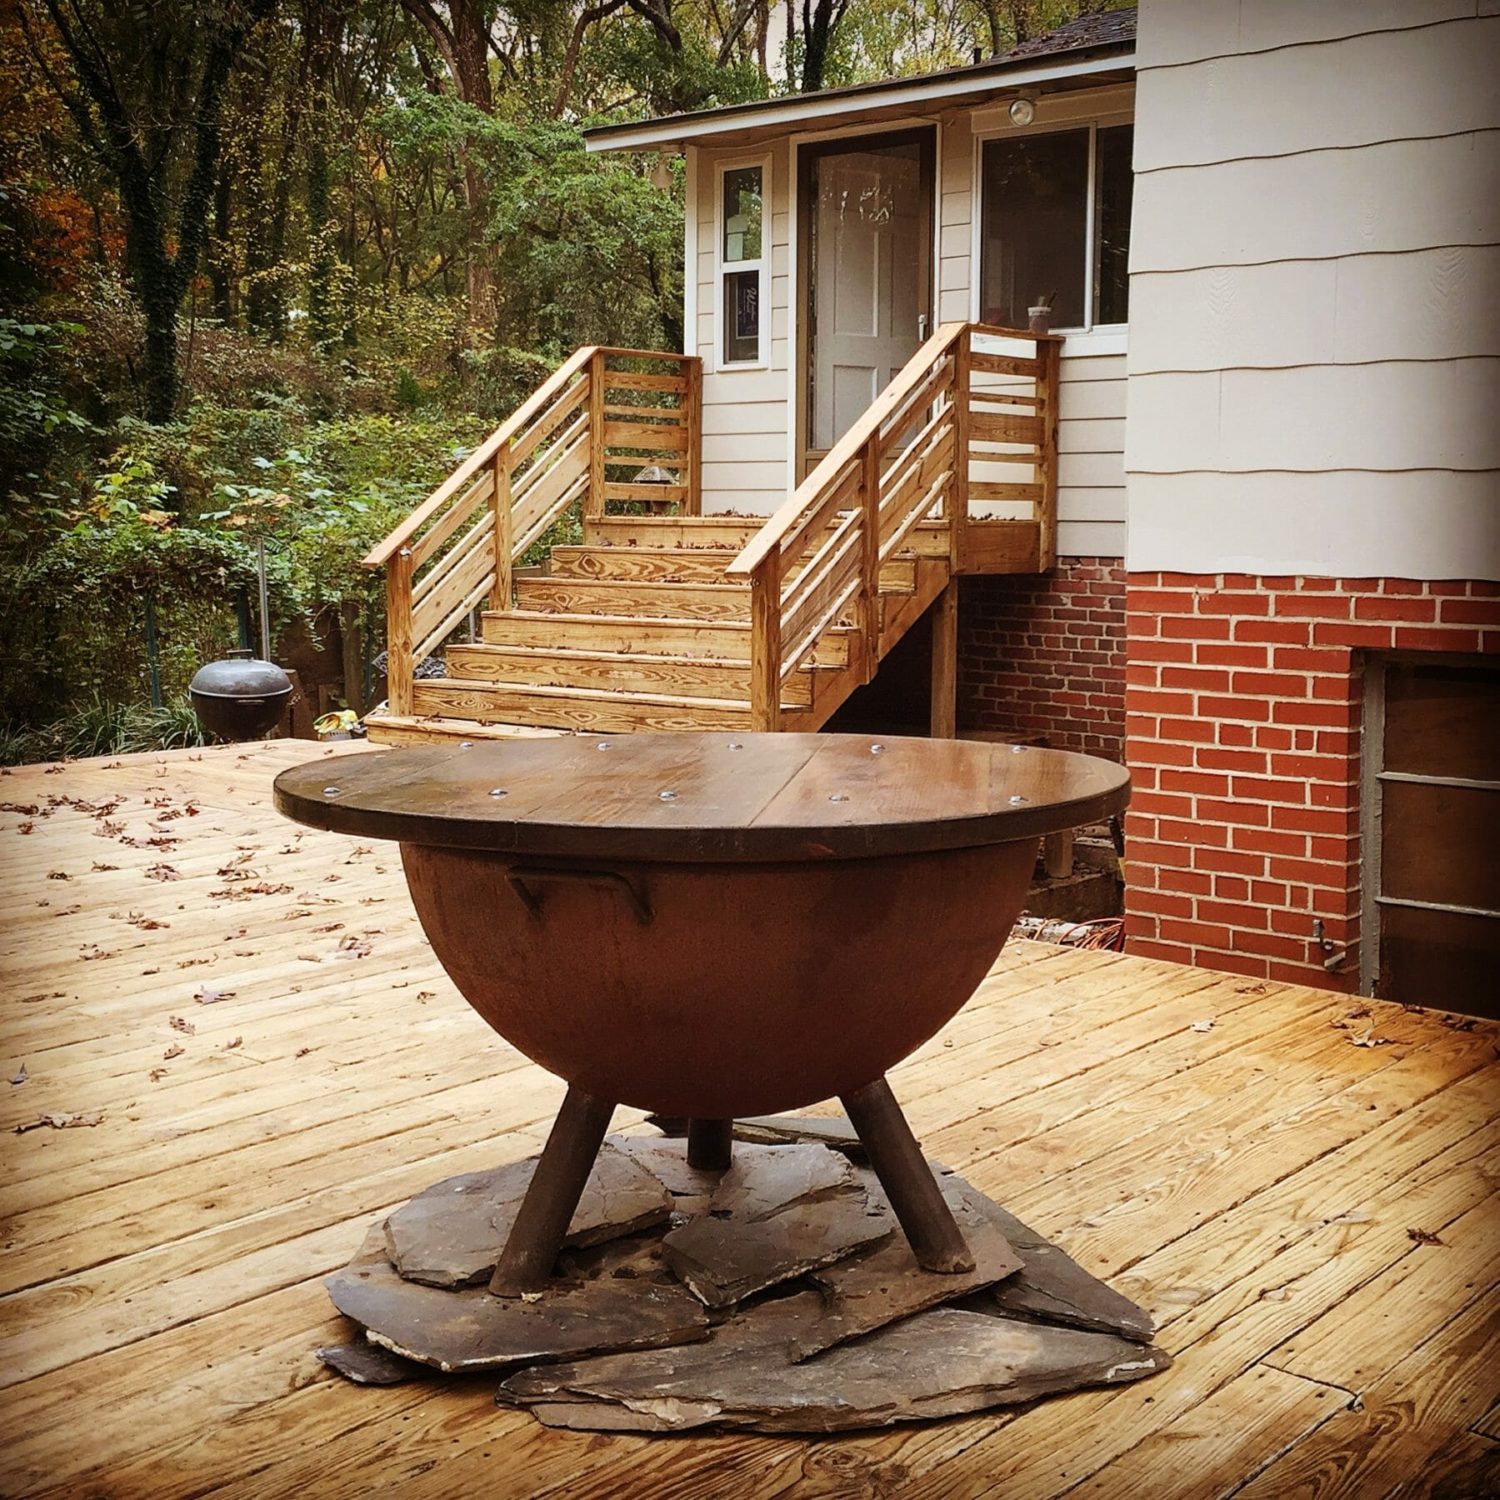 Can I Safely Use a S&S Fire Pit on My Deck?